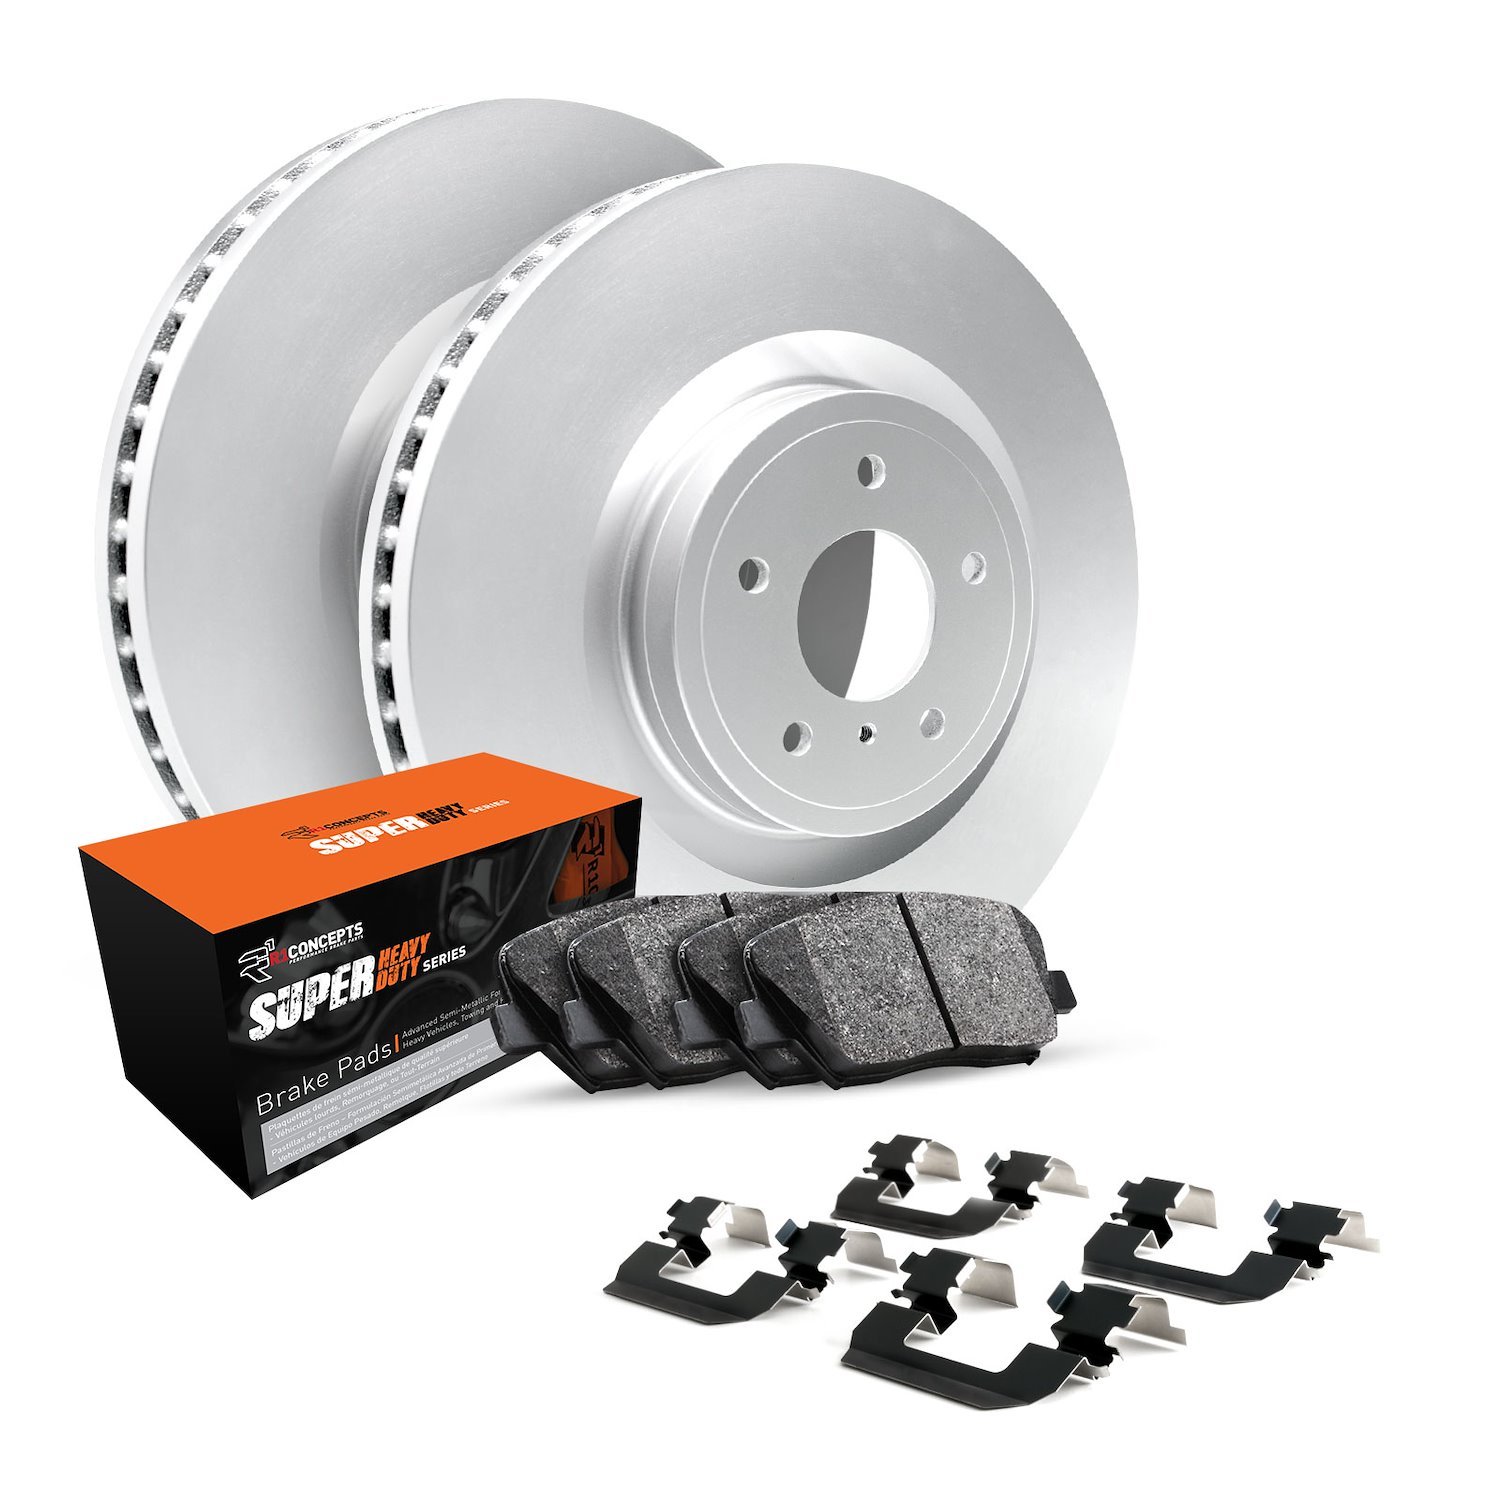 GEO-Carbon Brake Rotor Set w/Super-Duty Pads & Hardware, Fits Select Infiniti/Nissan, Position: Rear